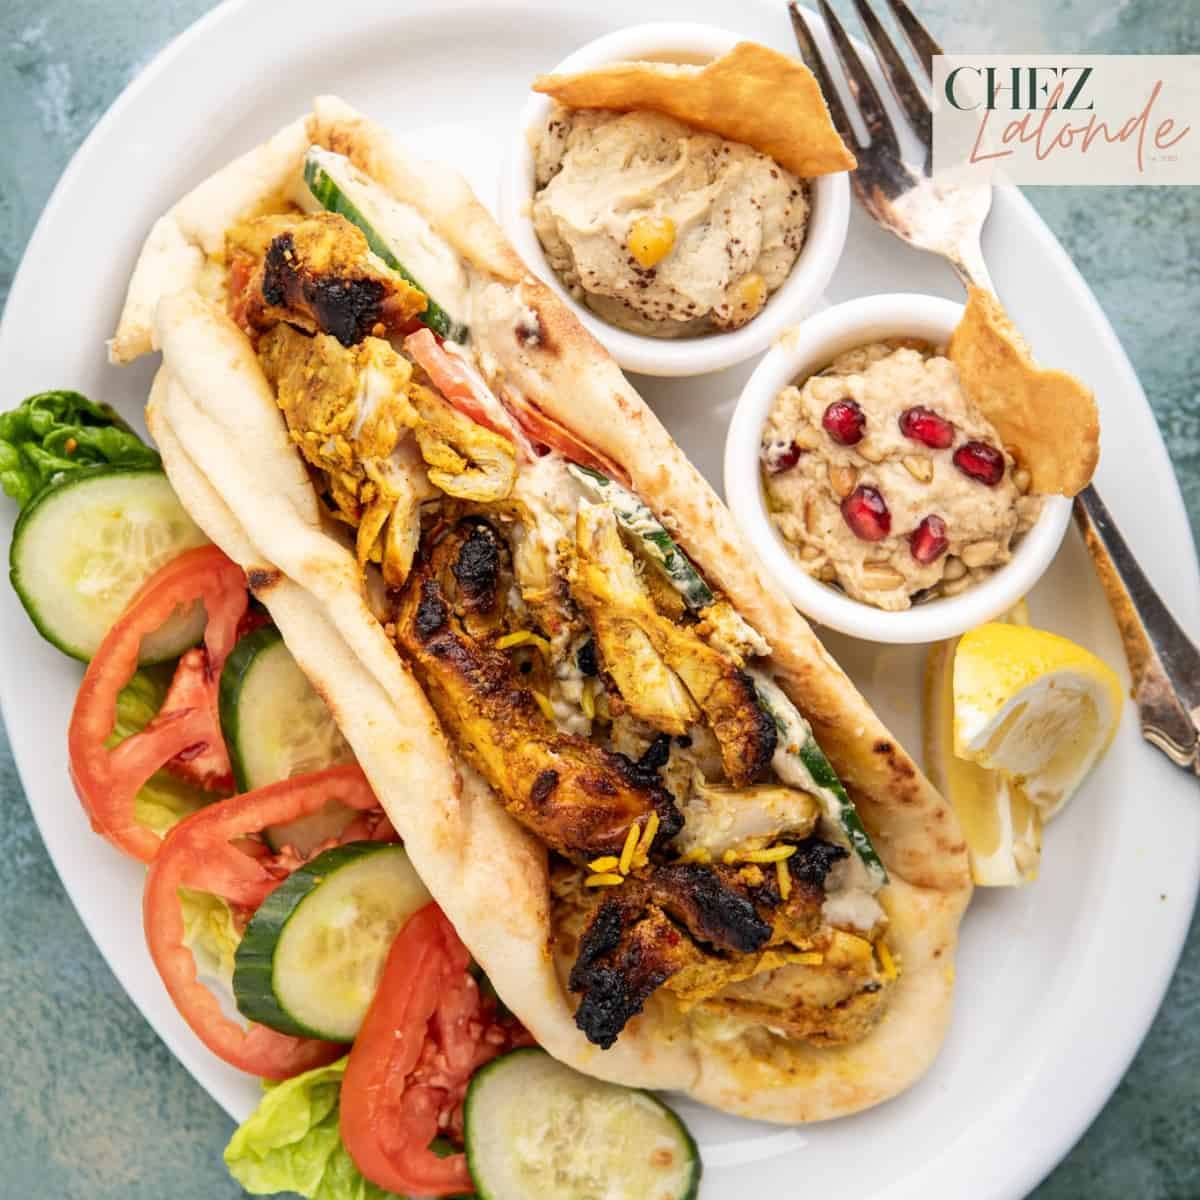 Air fryer chicken shawarma wrapped in Naan bread. Served with fresh vegetables, lemon wedges, hummus, and Baba ganoush.